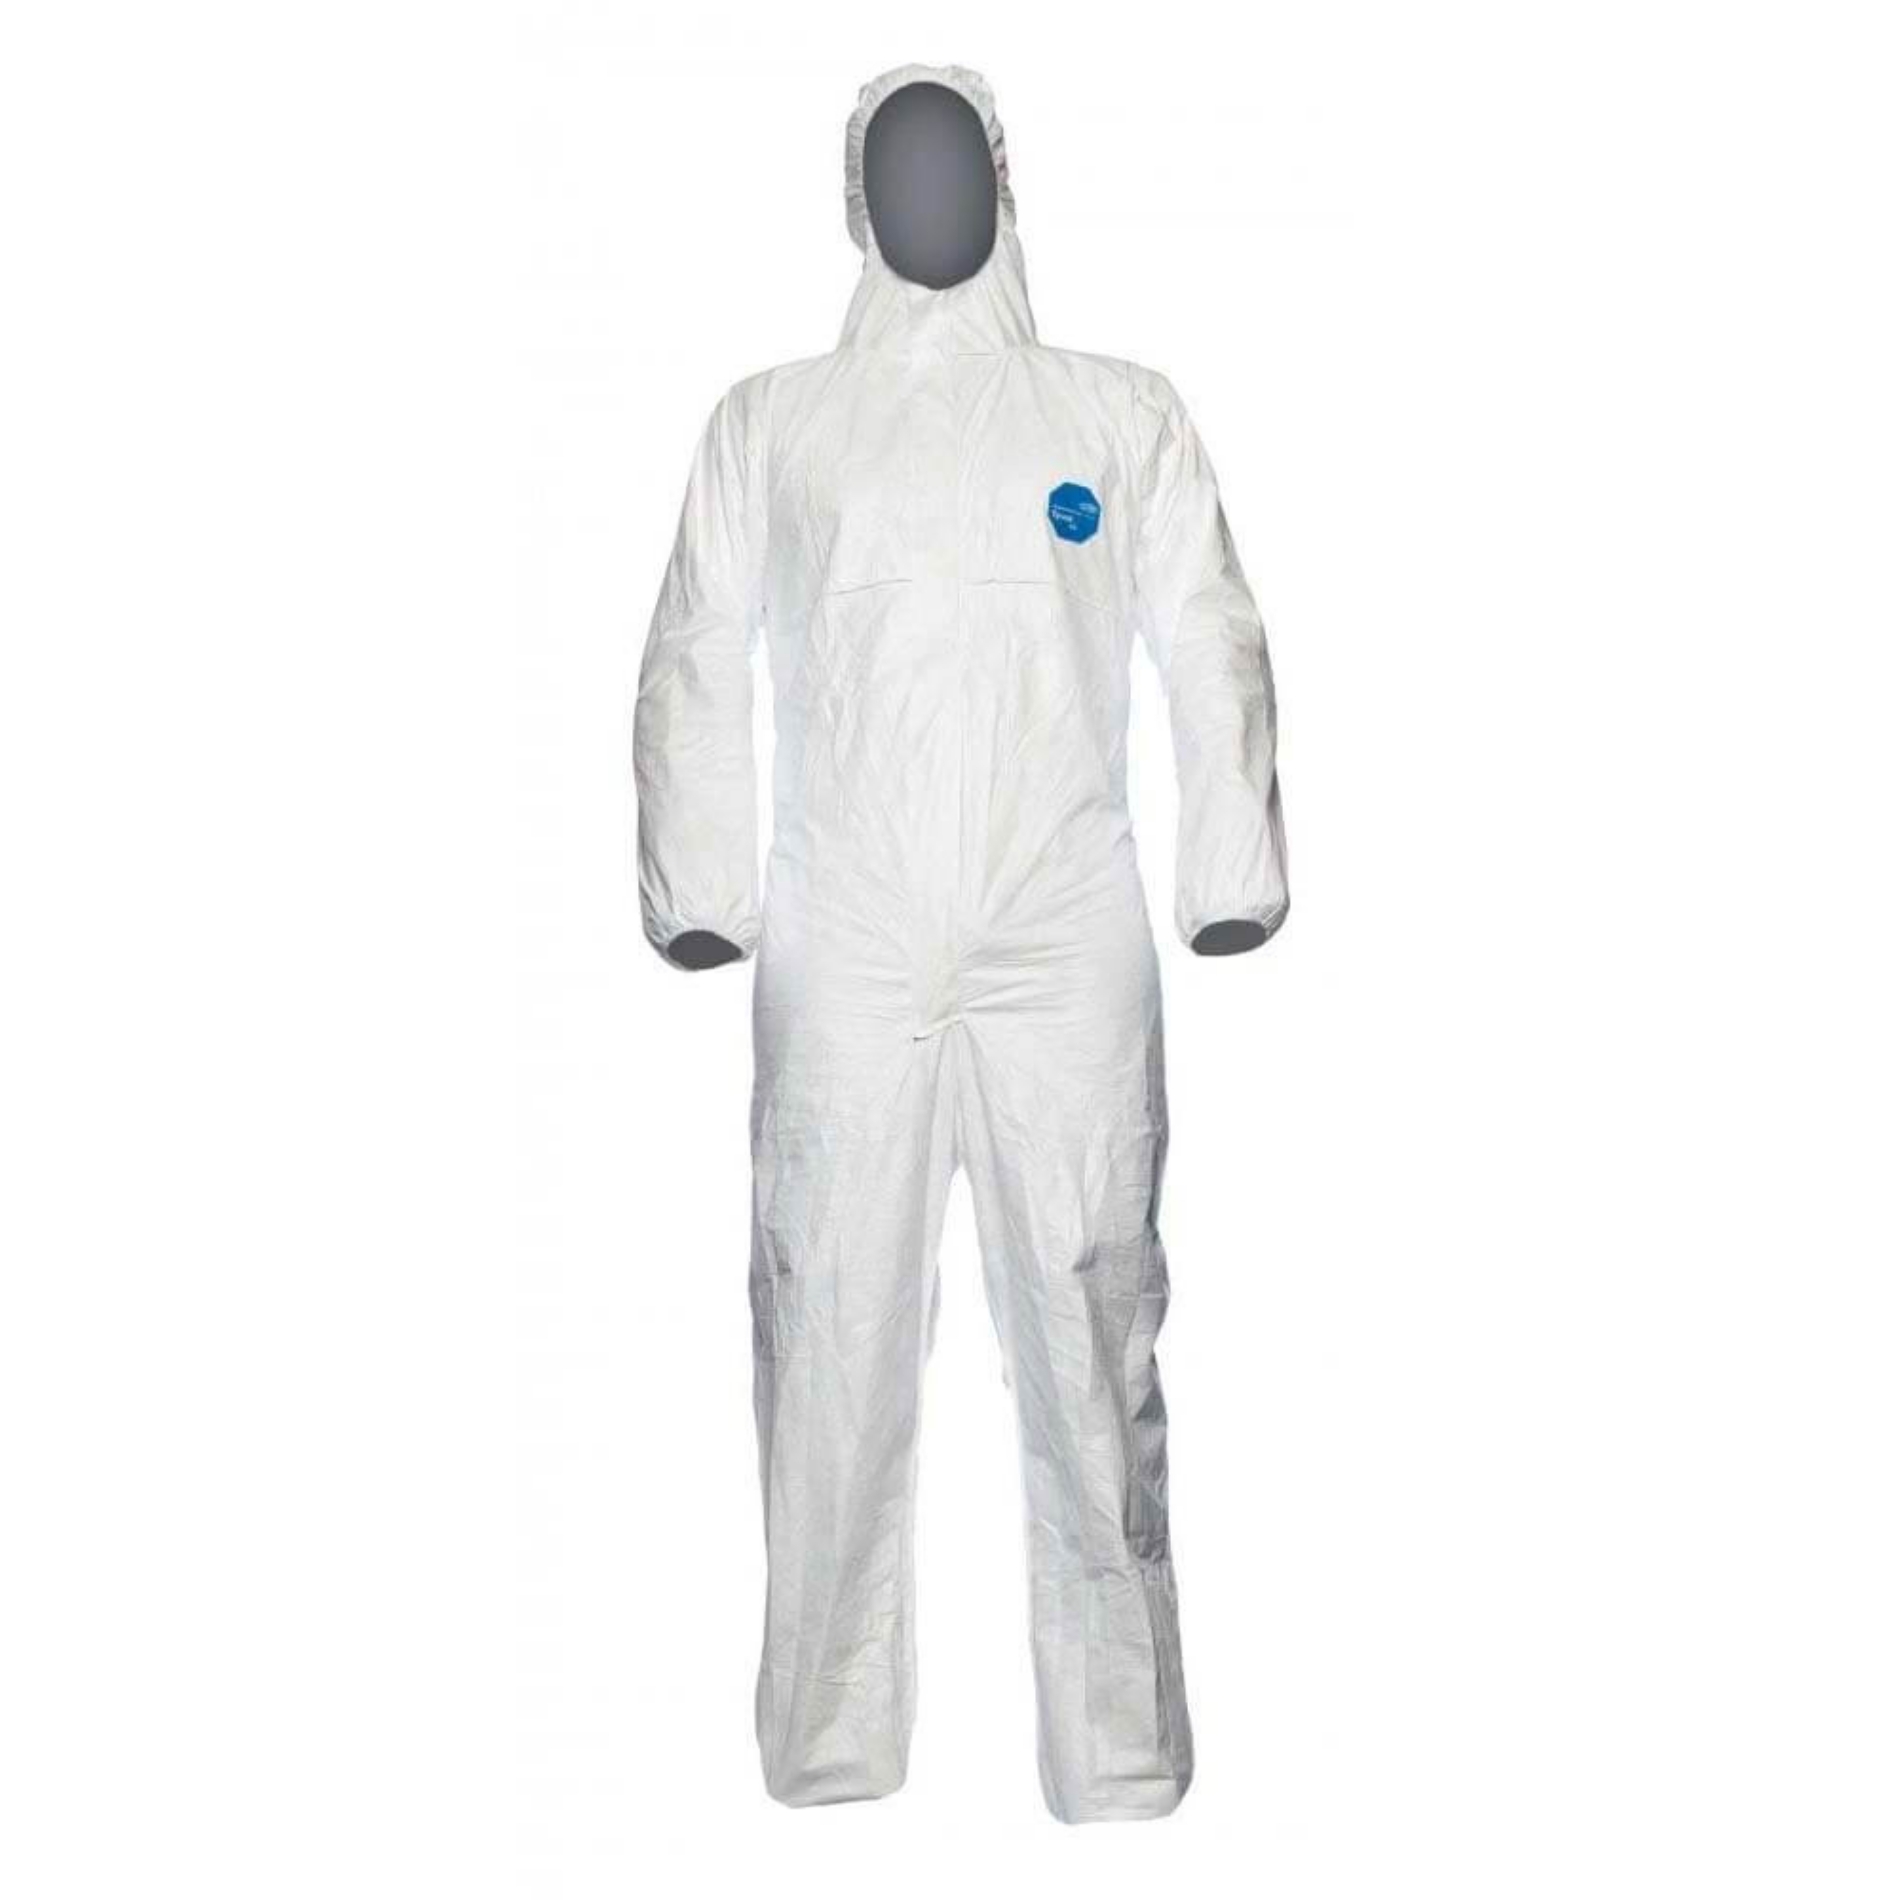 Picture of DuPont Tyvek 500 Xpert 5/6 Disposable Coverall - White